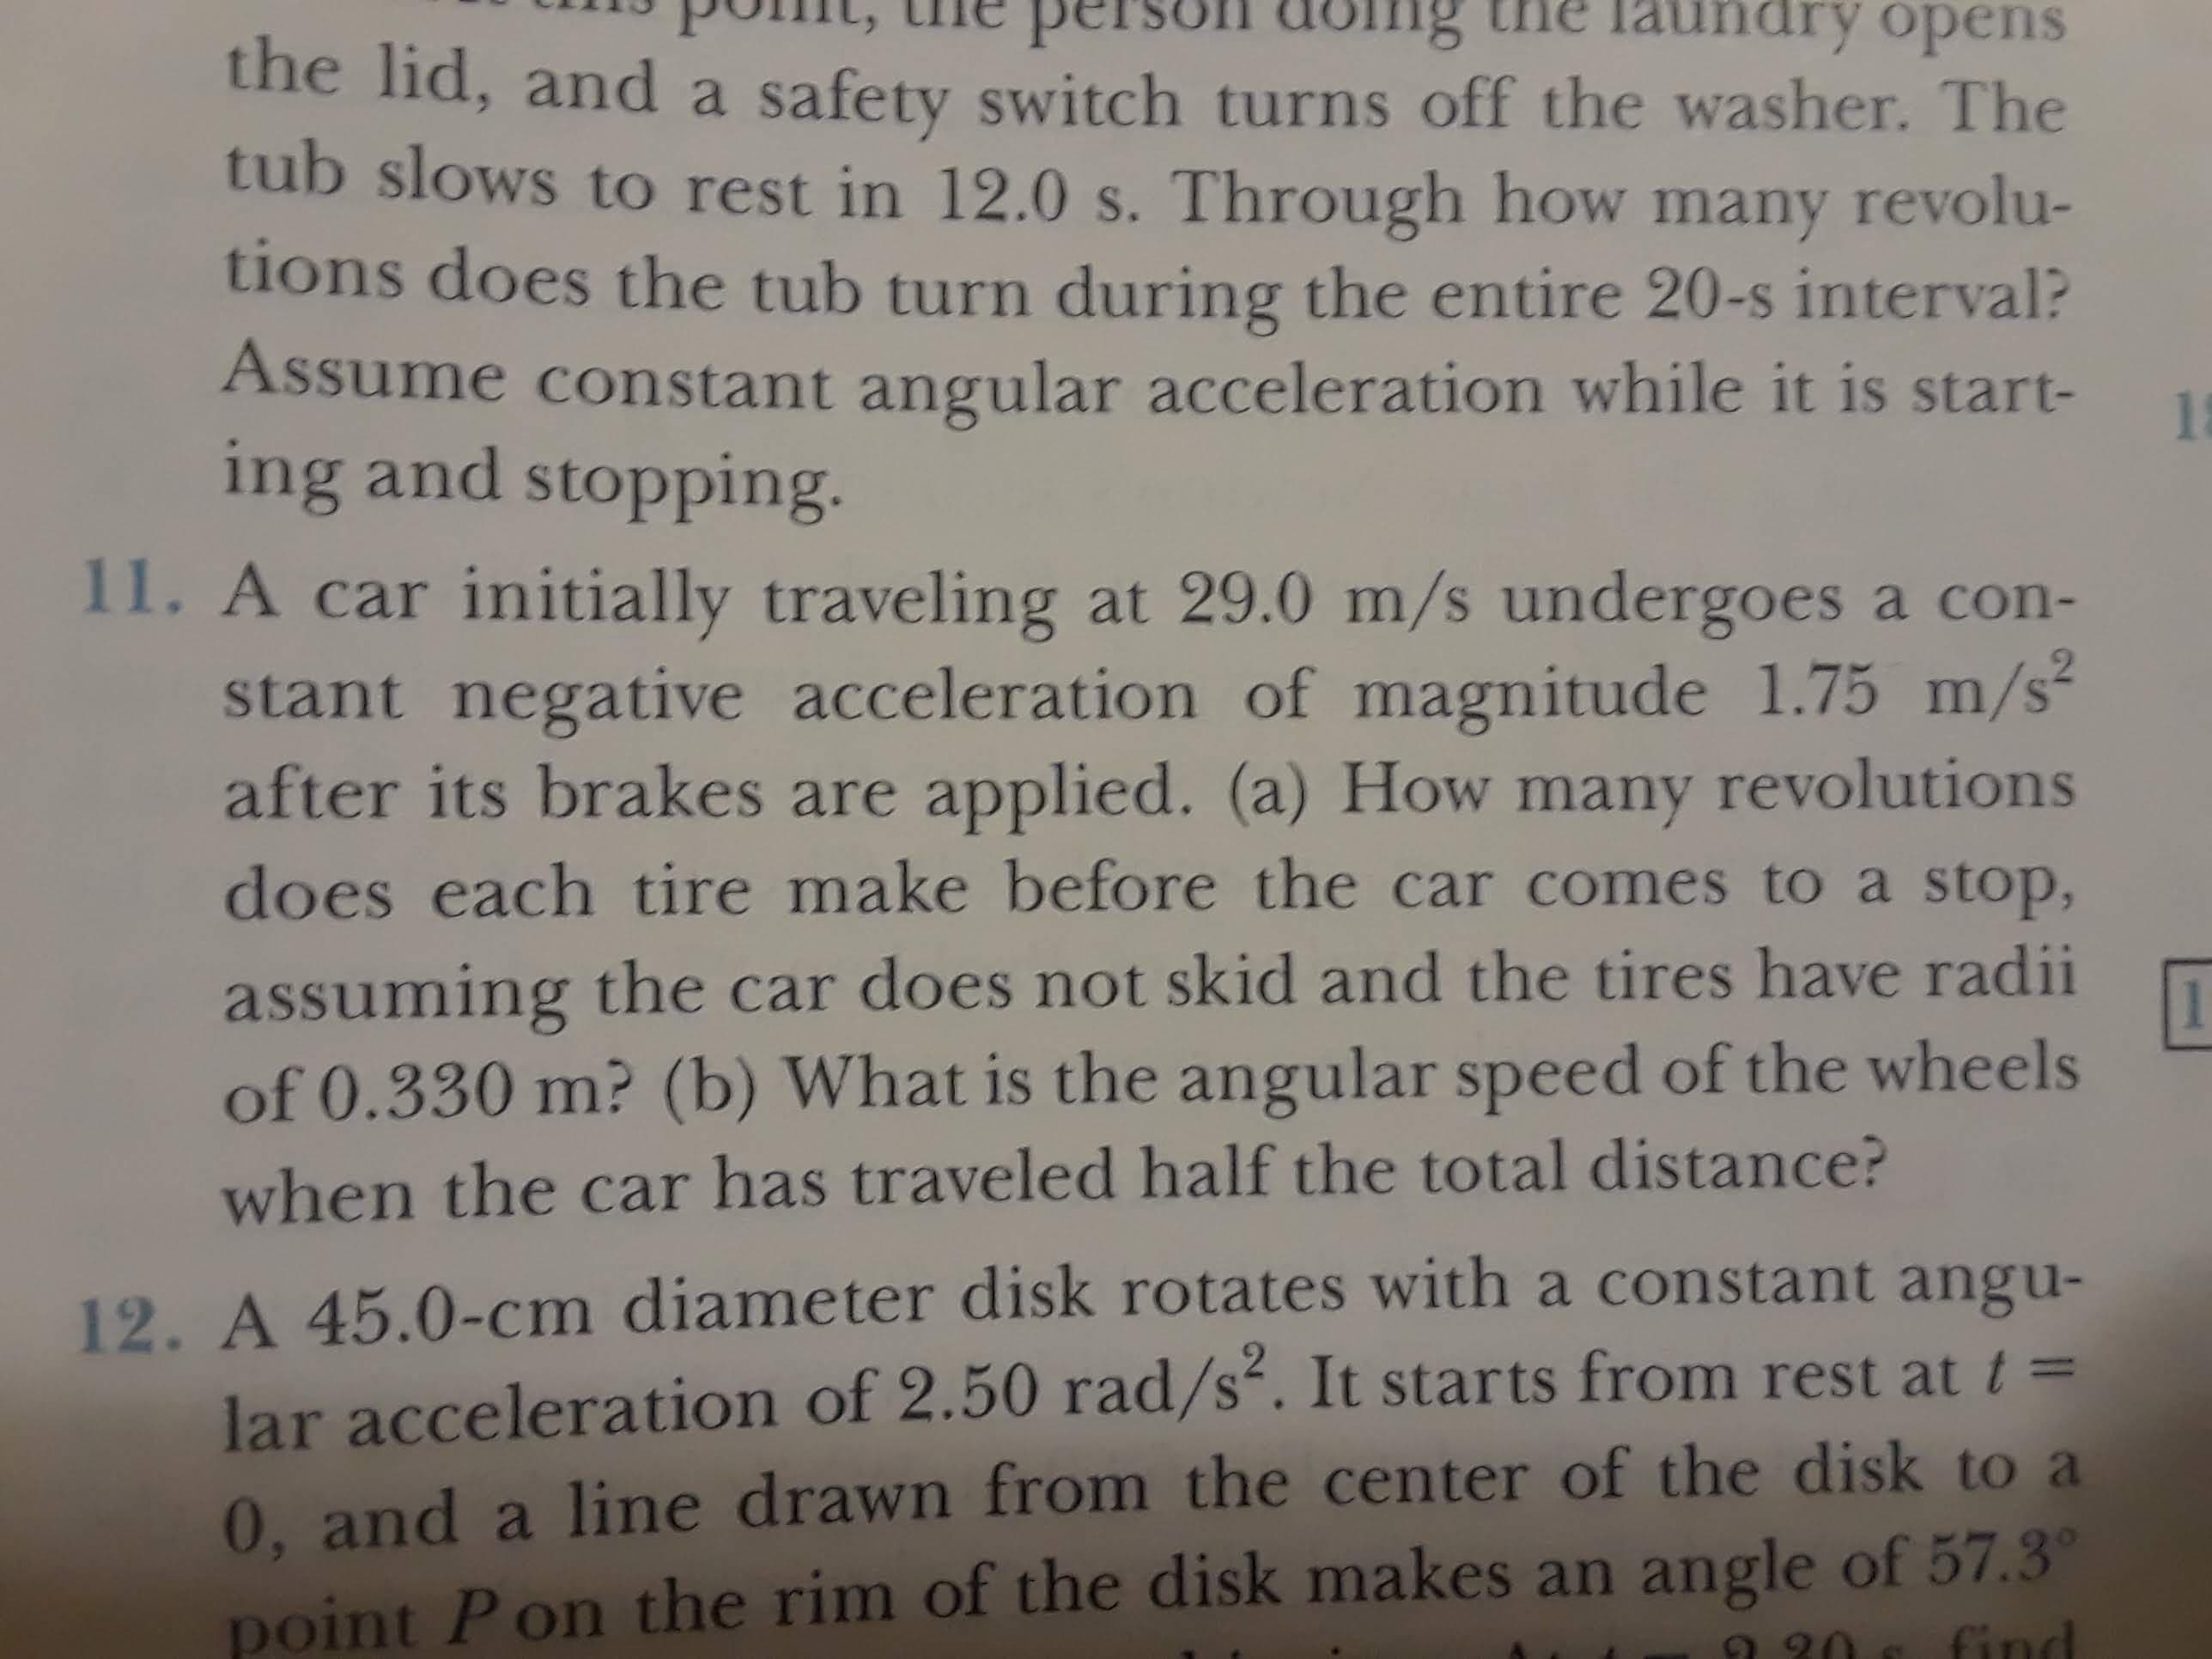 laundry opens
person dolng
the lid, and a safety switch turns off the washer. The
tub slows to rest in 12.0 s. Through how many revolu-
tions does the tub turn during the entire 20-s interval?
Assume constant angular acceleration while it is start-
1
ing and stopping
11. A car initially traveling at 29.0 m/s undergoes a con-
stant negative acceleration of magnitude 1.75 m/s
after its brakes are applied. (a) How many revolutions
does each tire make before the car comes to a stop,
assuming the car does not skid and the tires have radii
of 0.330 m? (b) What is the angular speed of the wheels
when the car has traveled half the total distance?
12. A 45.0-cm diameter disk rotates with a constant angu-
lar acceleration of 2.50 rad/s. It starts from rest at t=
0, and a line drawn from the center of the disk to a
point Pon the rim of the disk makes an angle of 57.3
find
